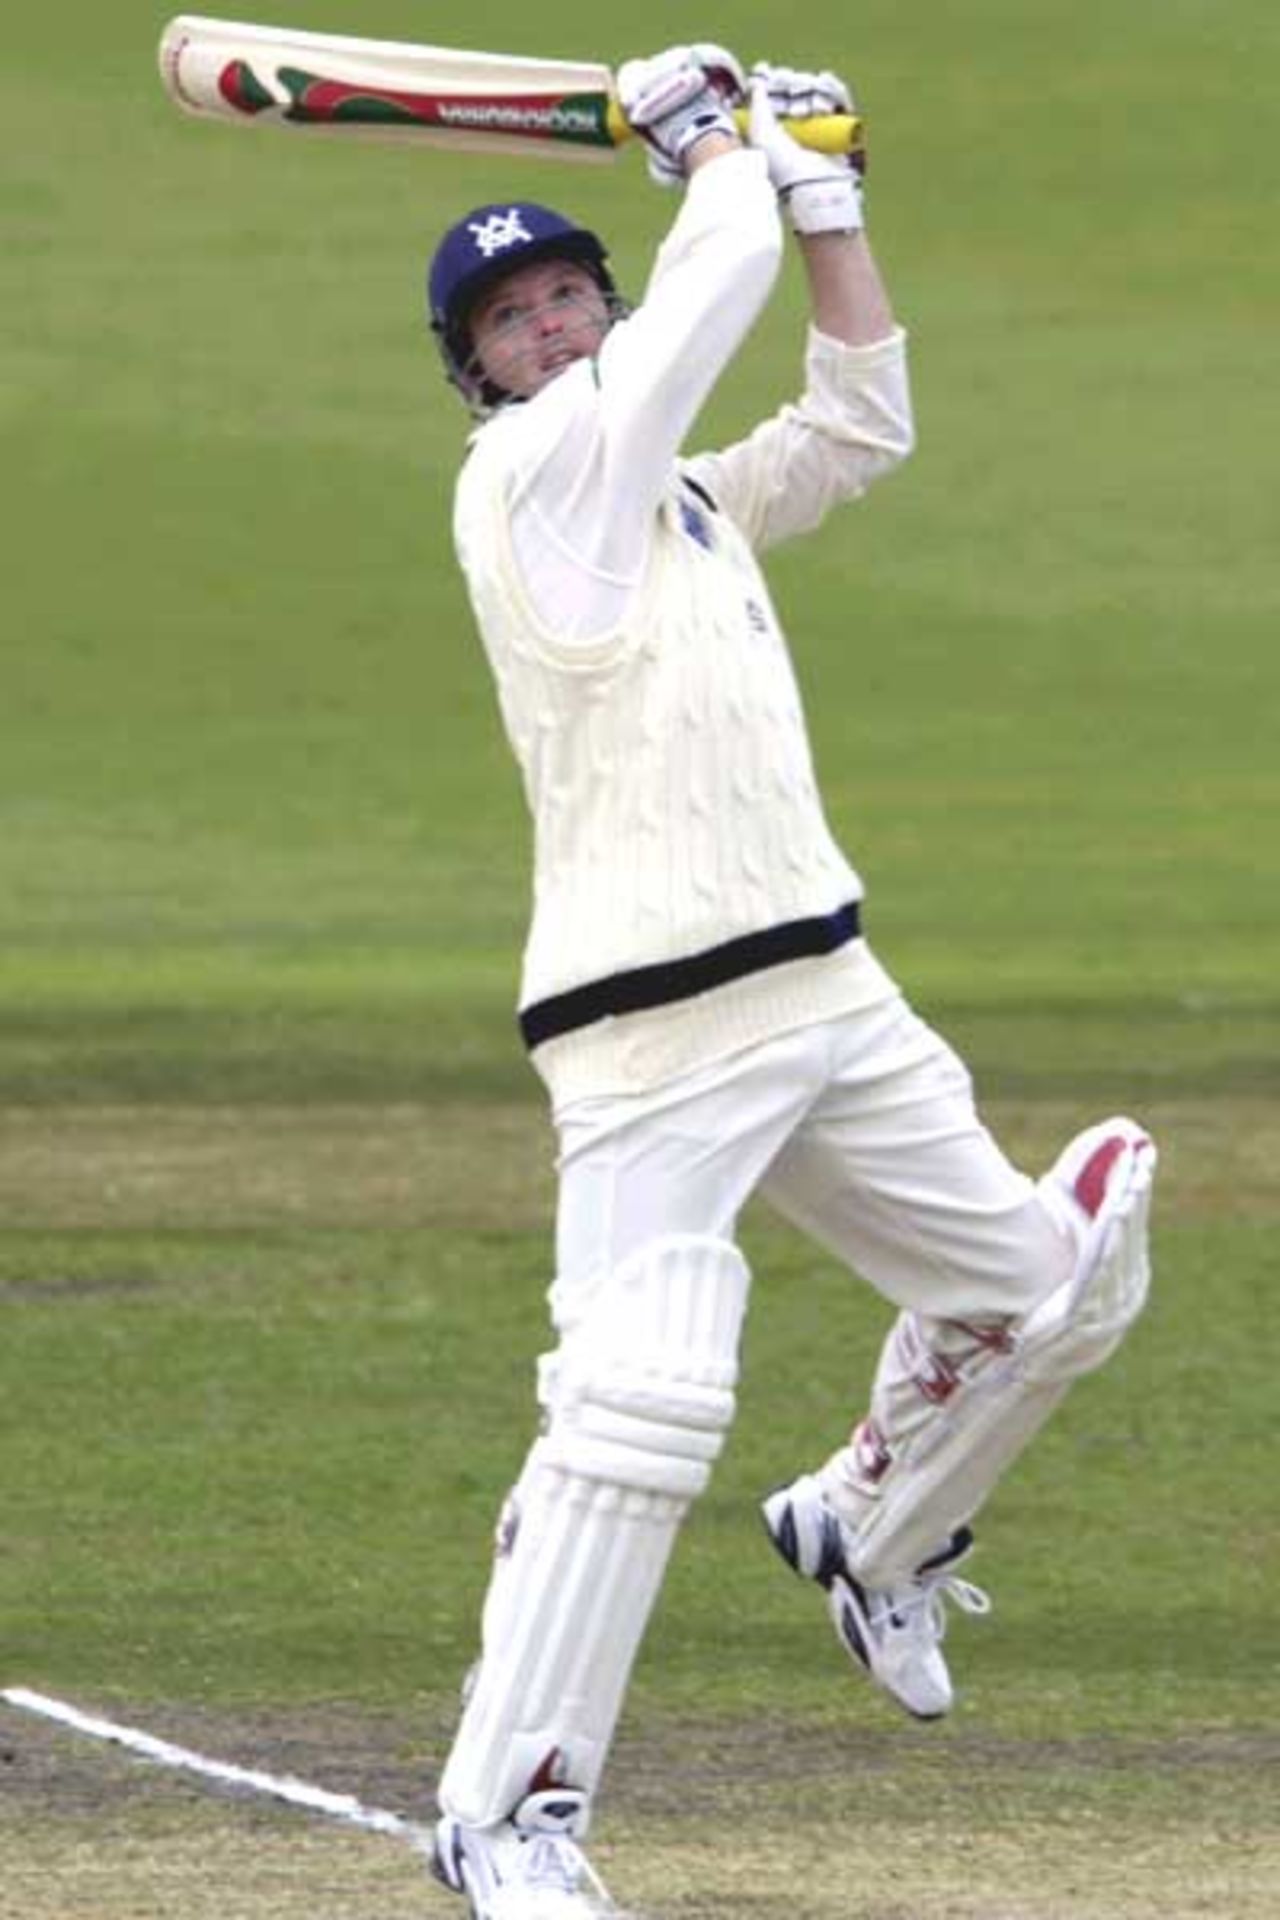 18 Oct 2001: Victorian batsman Ian Harvey in action in the Pura Cup match between the Southern Redbacks and the Victoria Bushrangers played at Adelaide Oval, Adelaide, Australia.